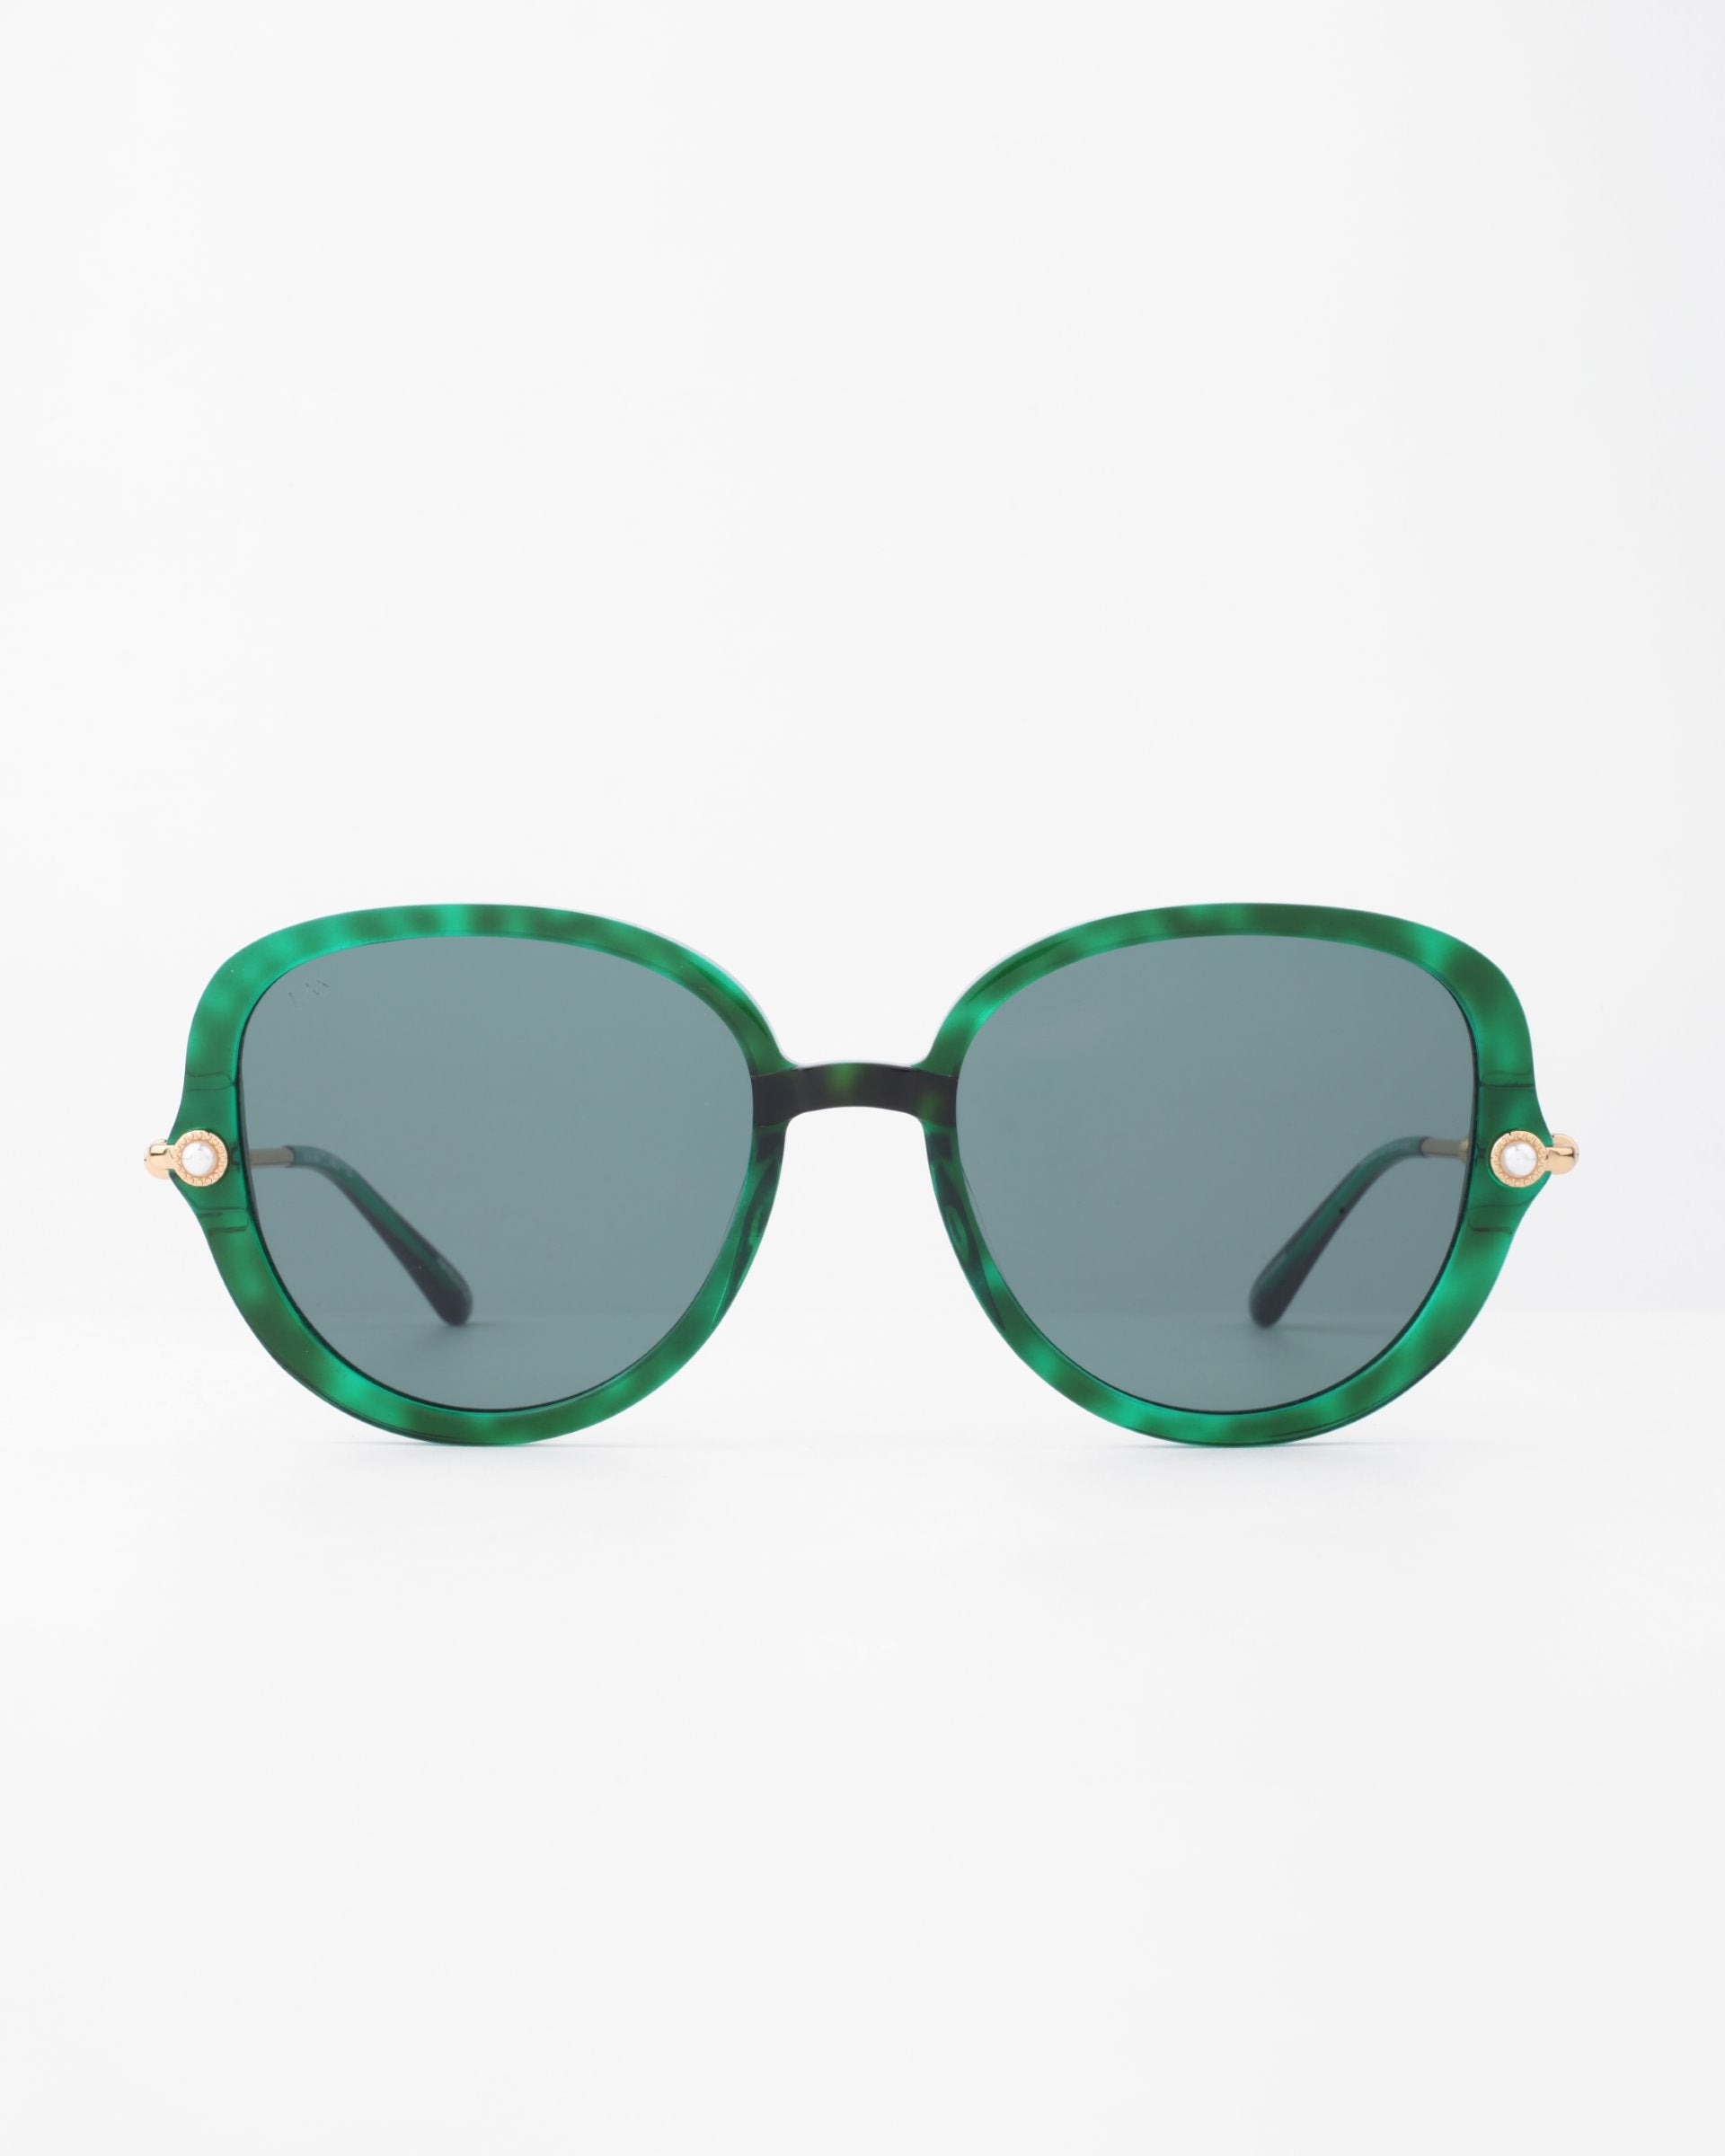 A pair of stylish green round sunglasses with dark tinted lenses are centered against a plain white background. The Primrose sunglasses by For Art's Sake® have gold accents on the hinges, adding a touch of elegance, and feature a plant-based acetate frame for an eco-friendly twist.